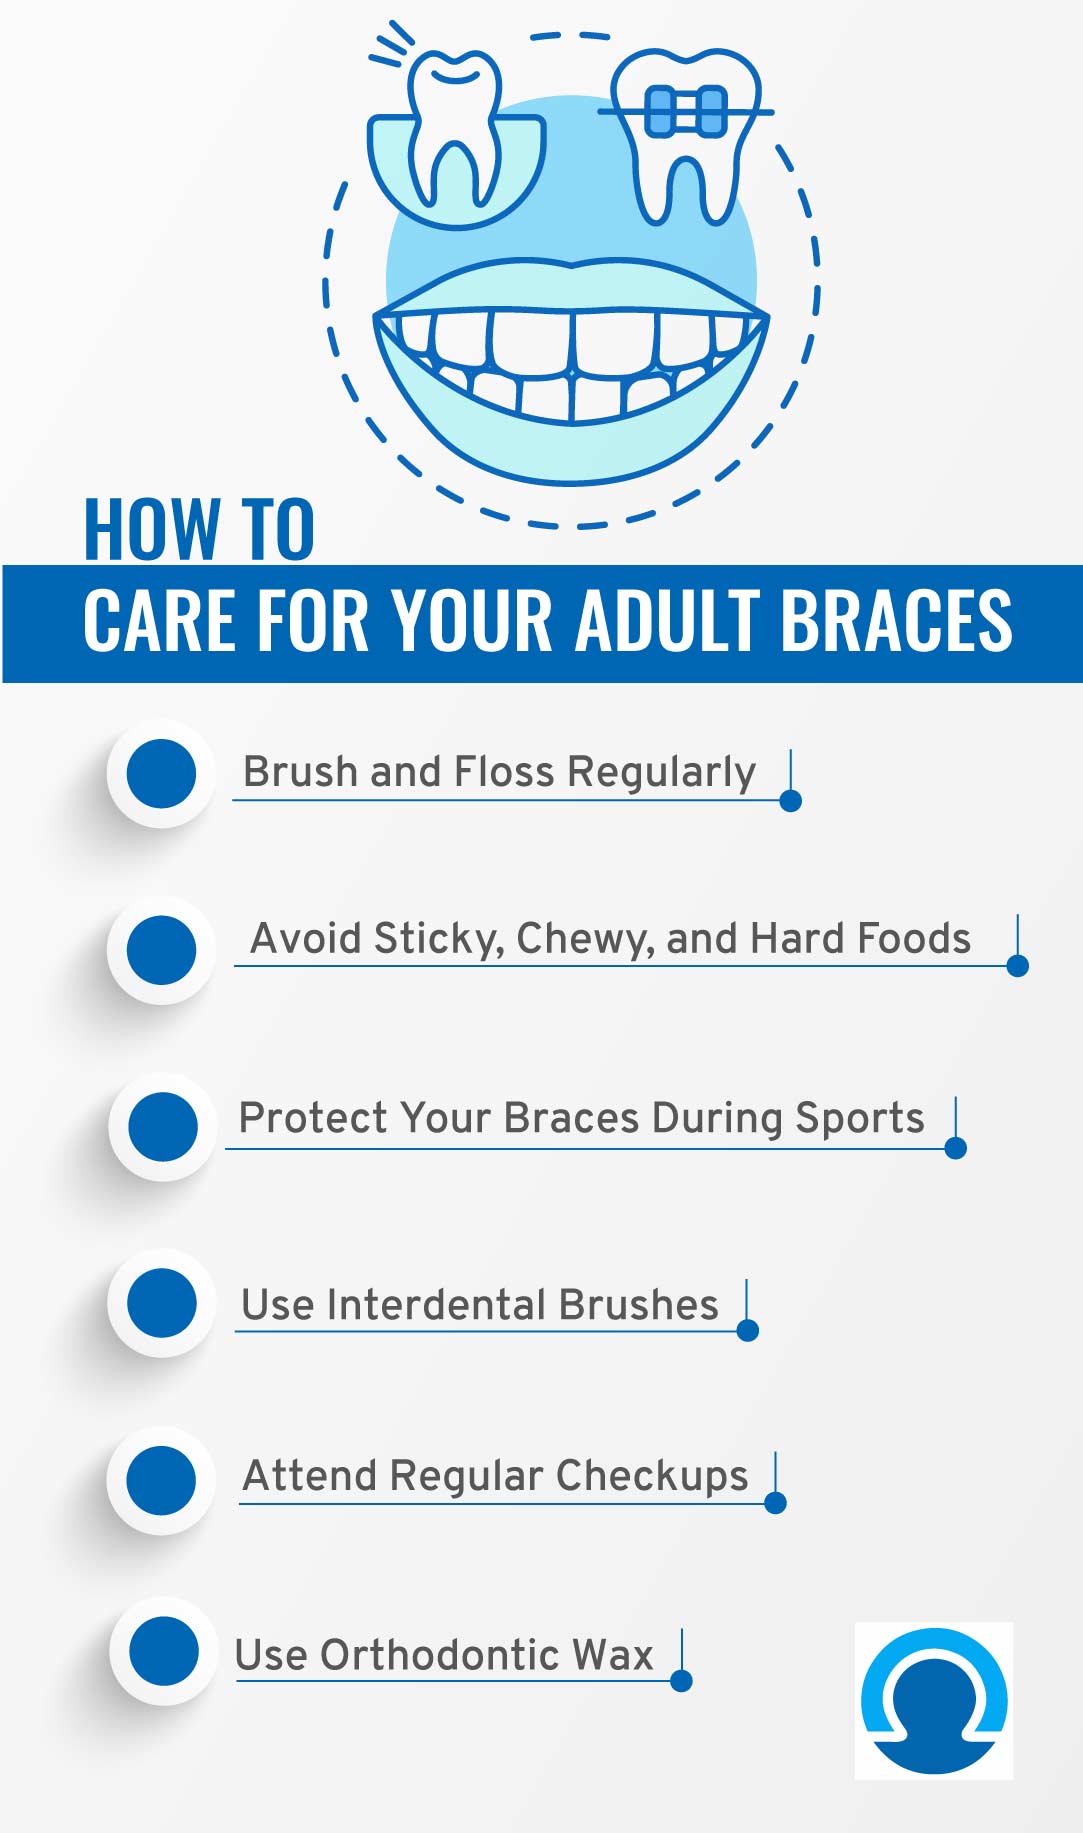 How to Care for Adult Braces